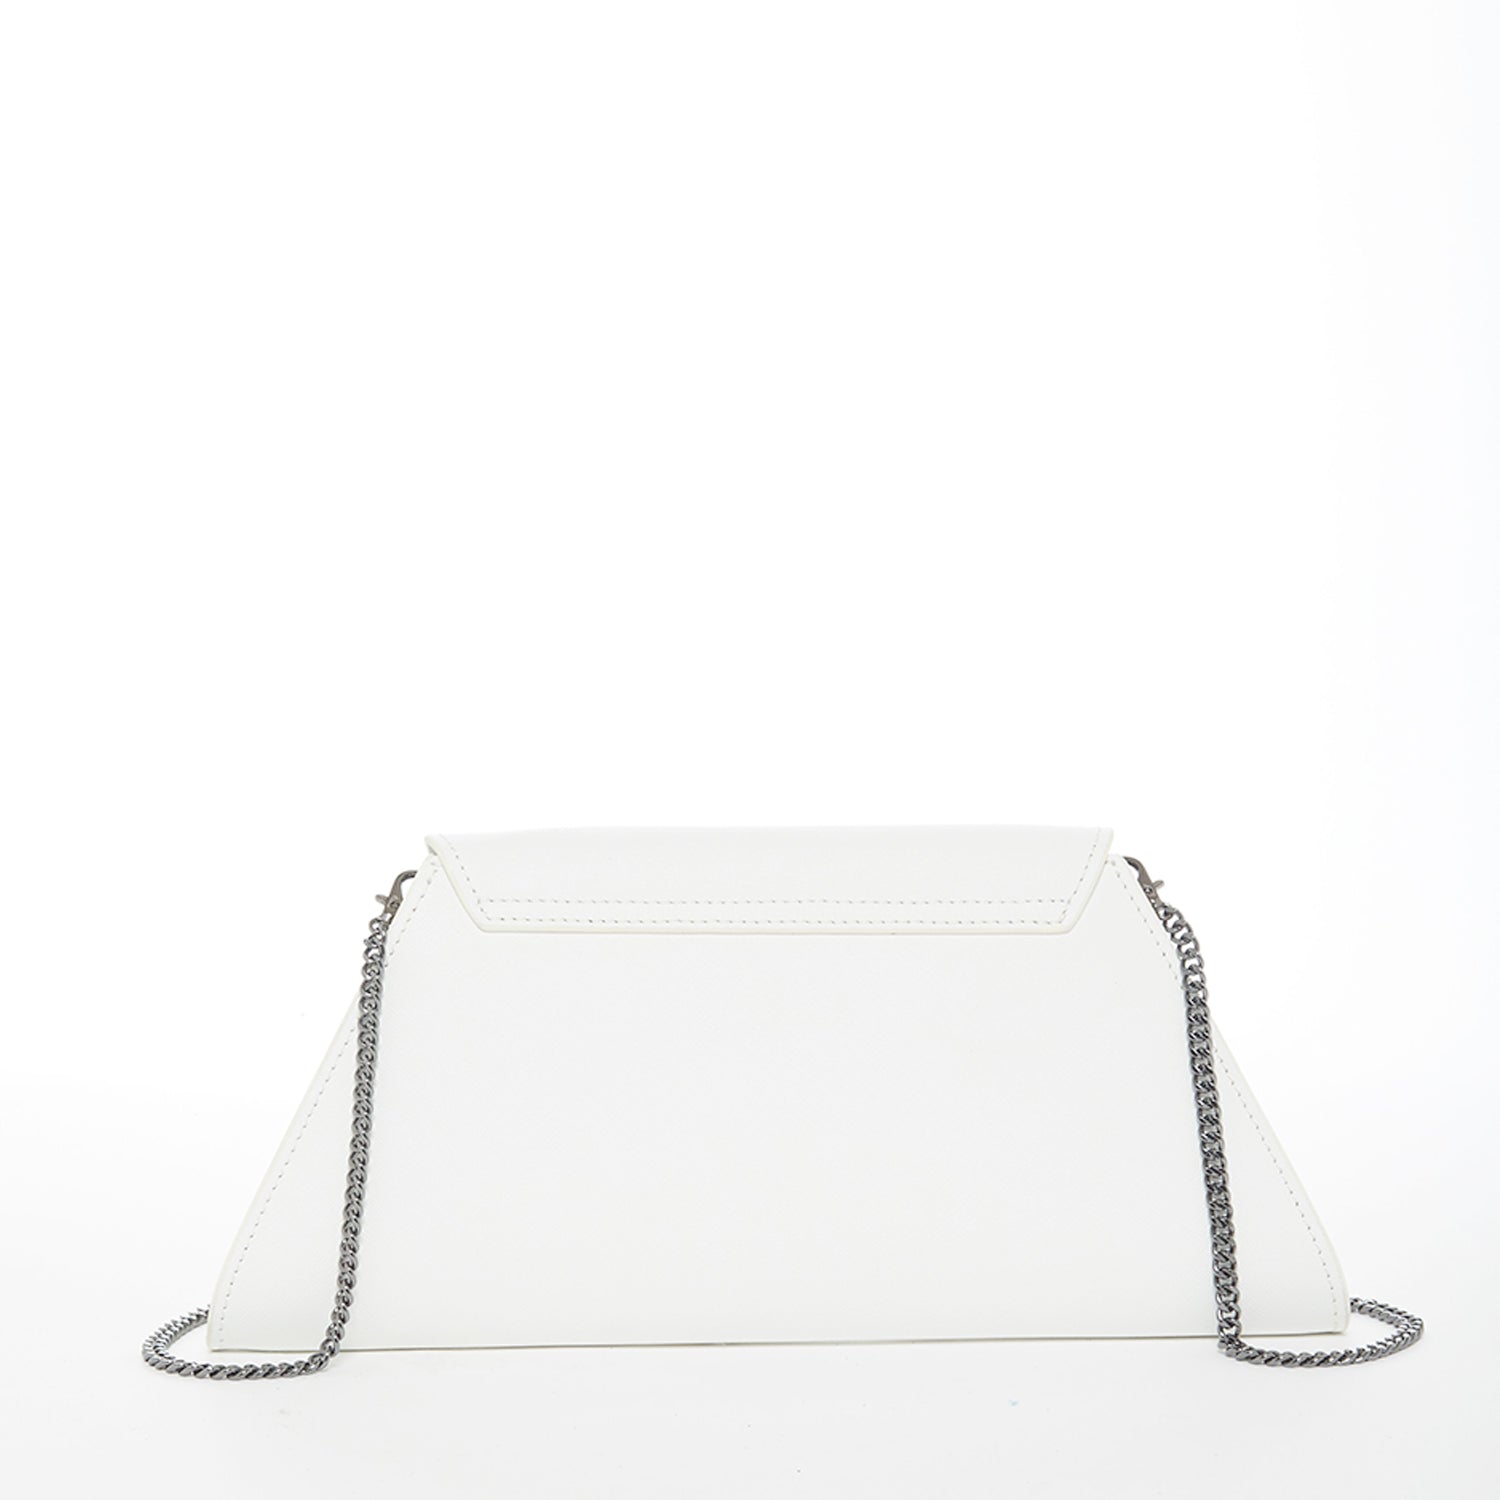 Angelica White Leather Clutch Bag - Elevate Your Style with Elegance and Versatility